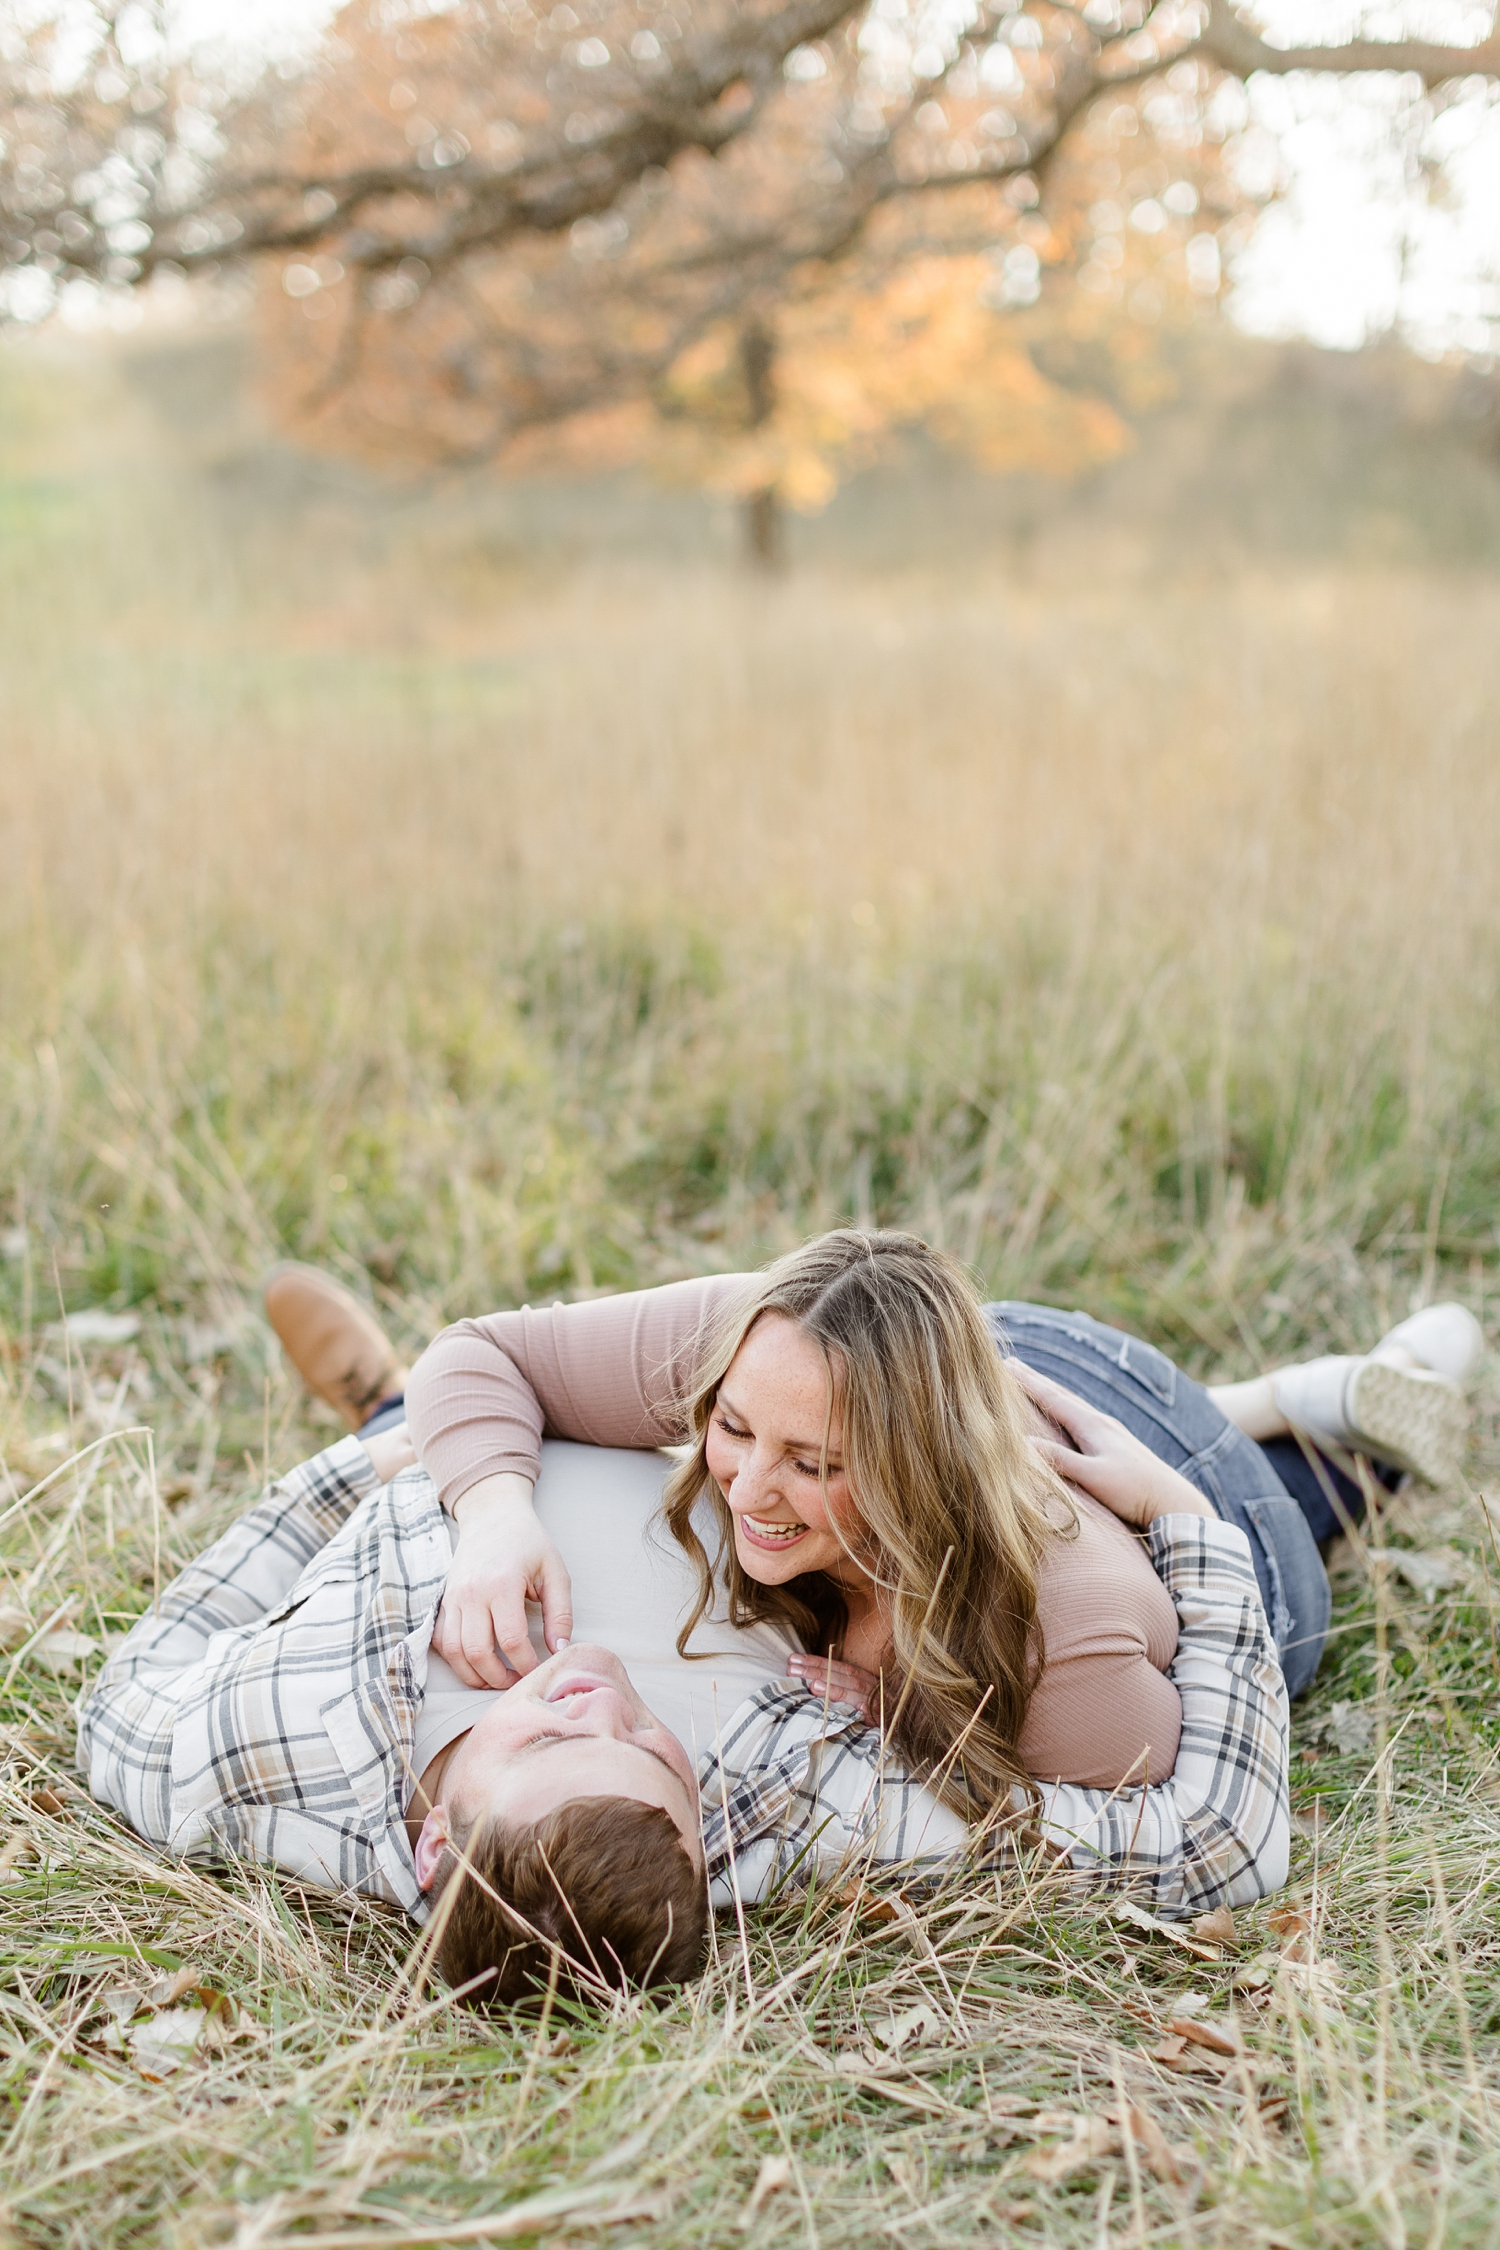 Shelby, while laughing at Taylor, together they lay down in a grass pasture in Iowa | CB Studio